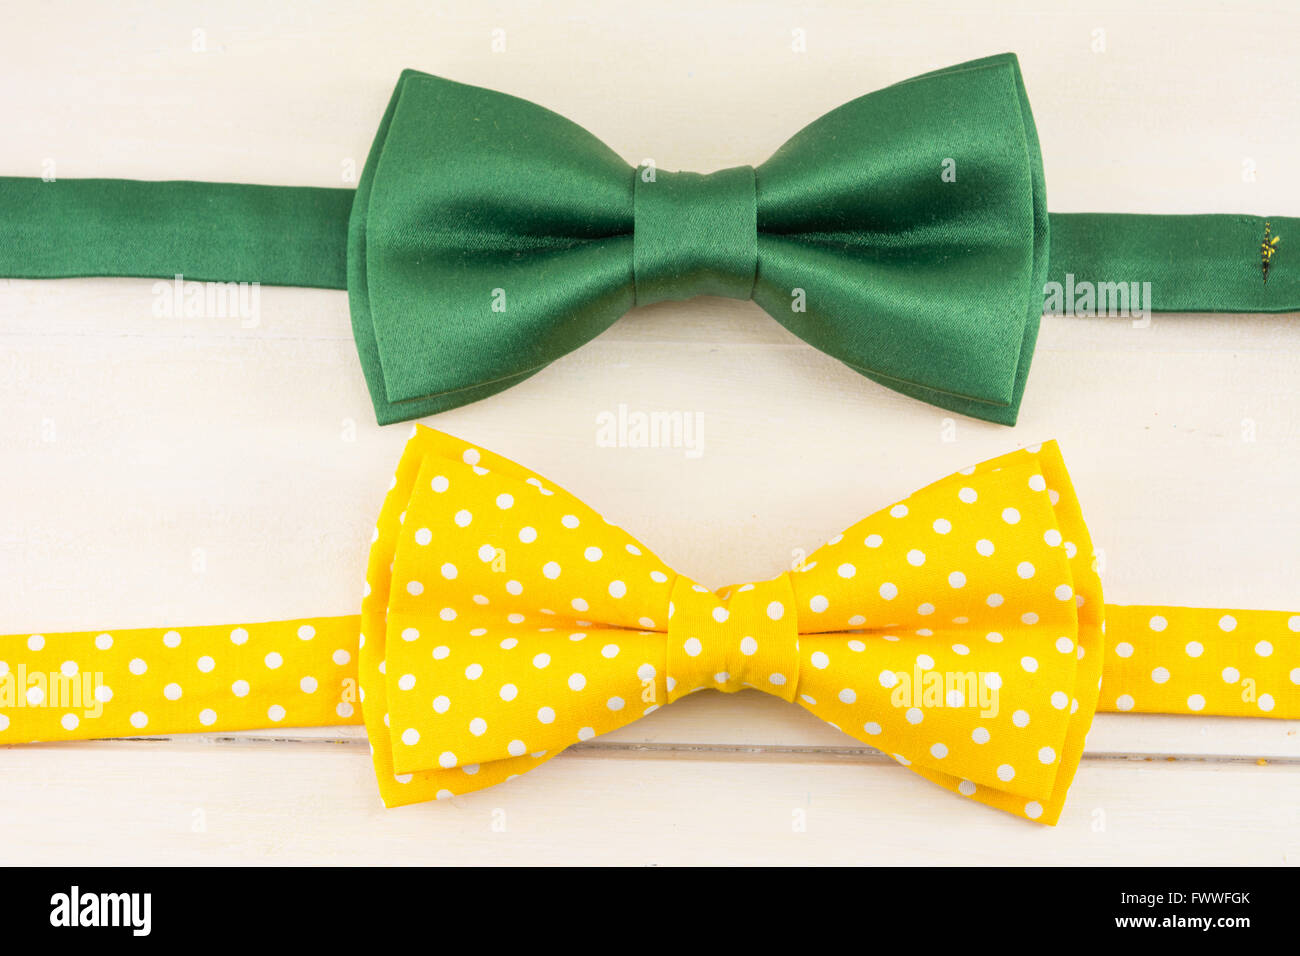 Bow ties on a wooden table Stock Photo